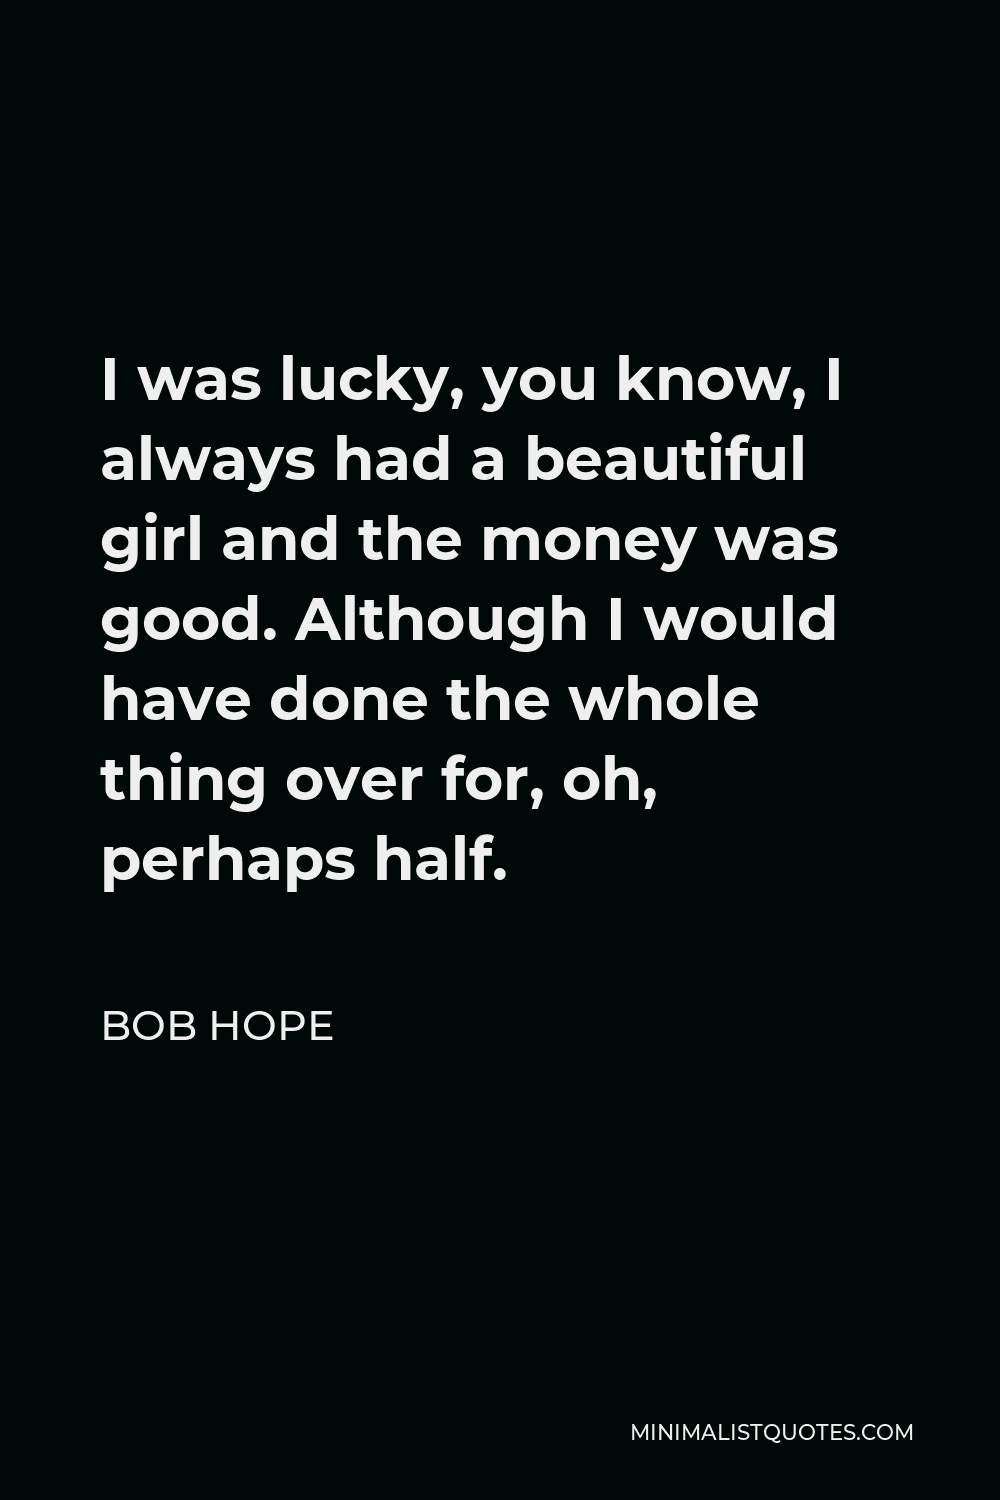 Bob Hope Quote - I was lucky, you know, I always had a beautiful girl and the money was good. Although I would have done the whole thing over for, oh, perhaps half.